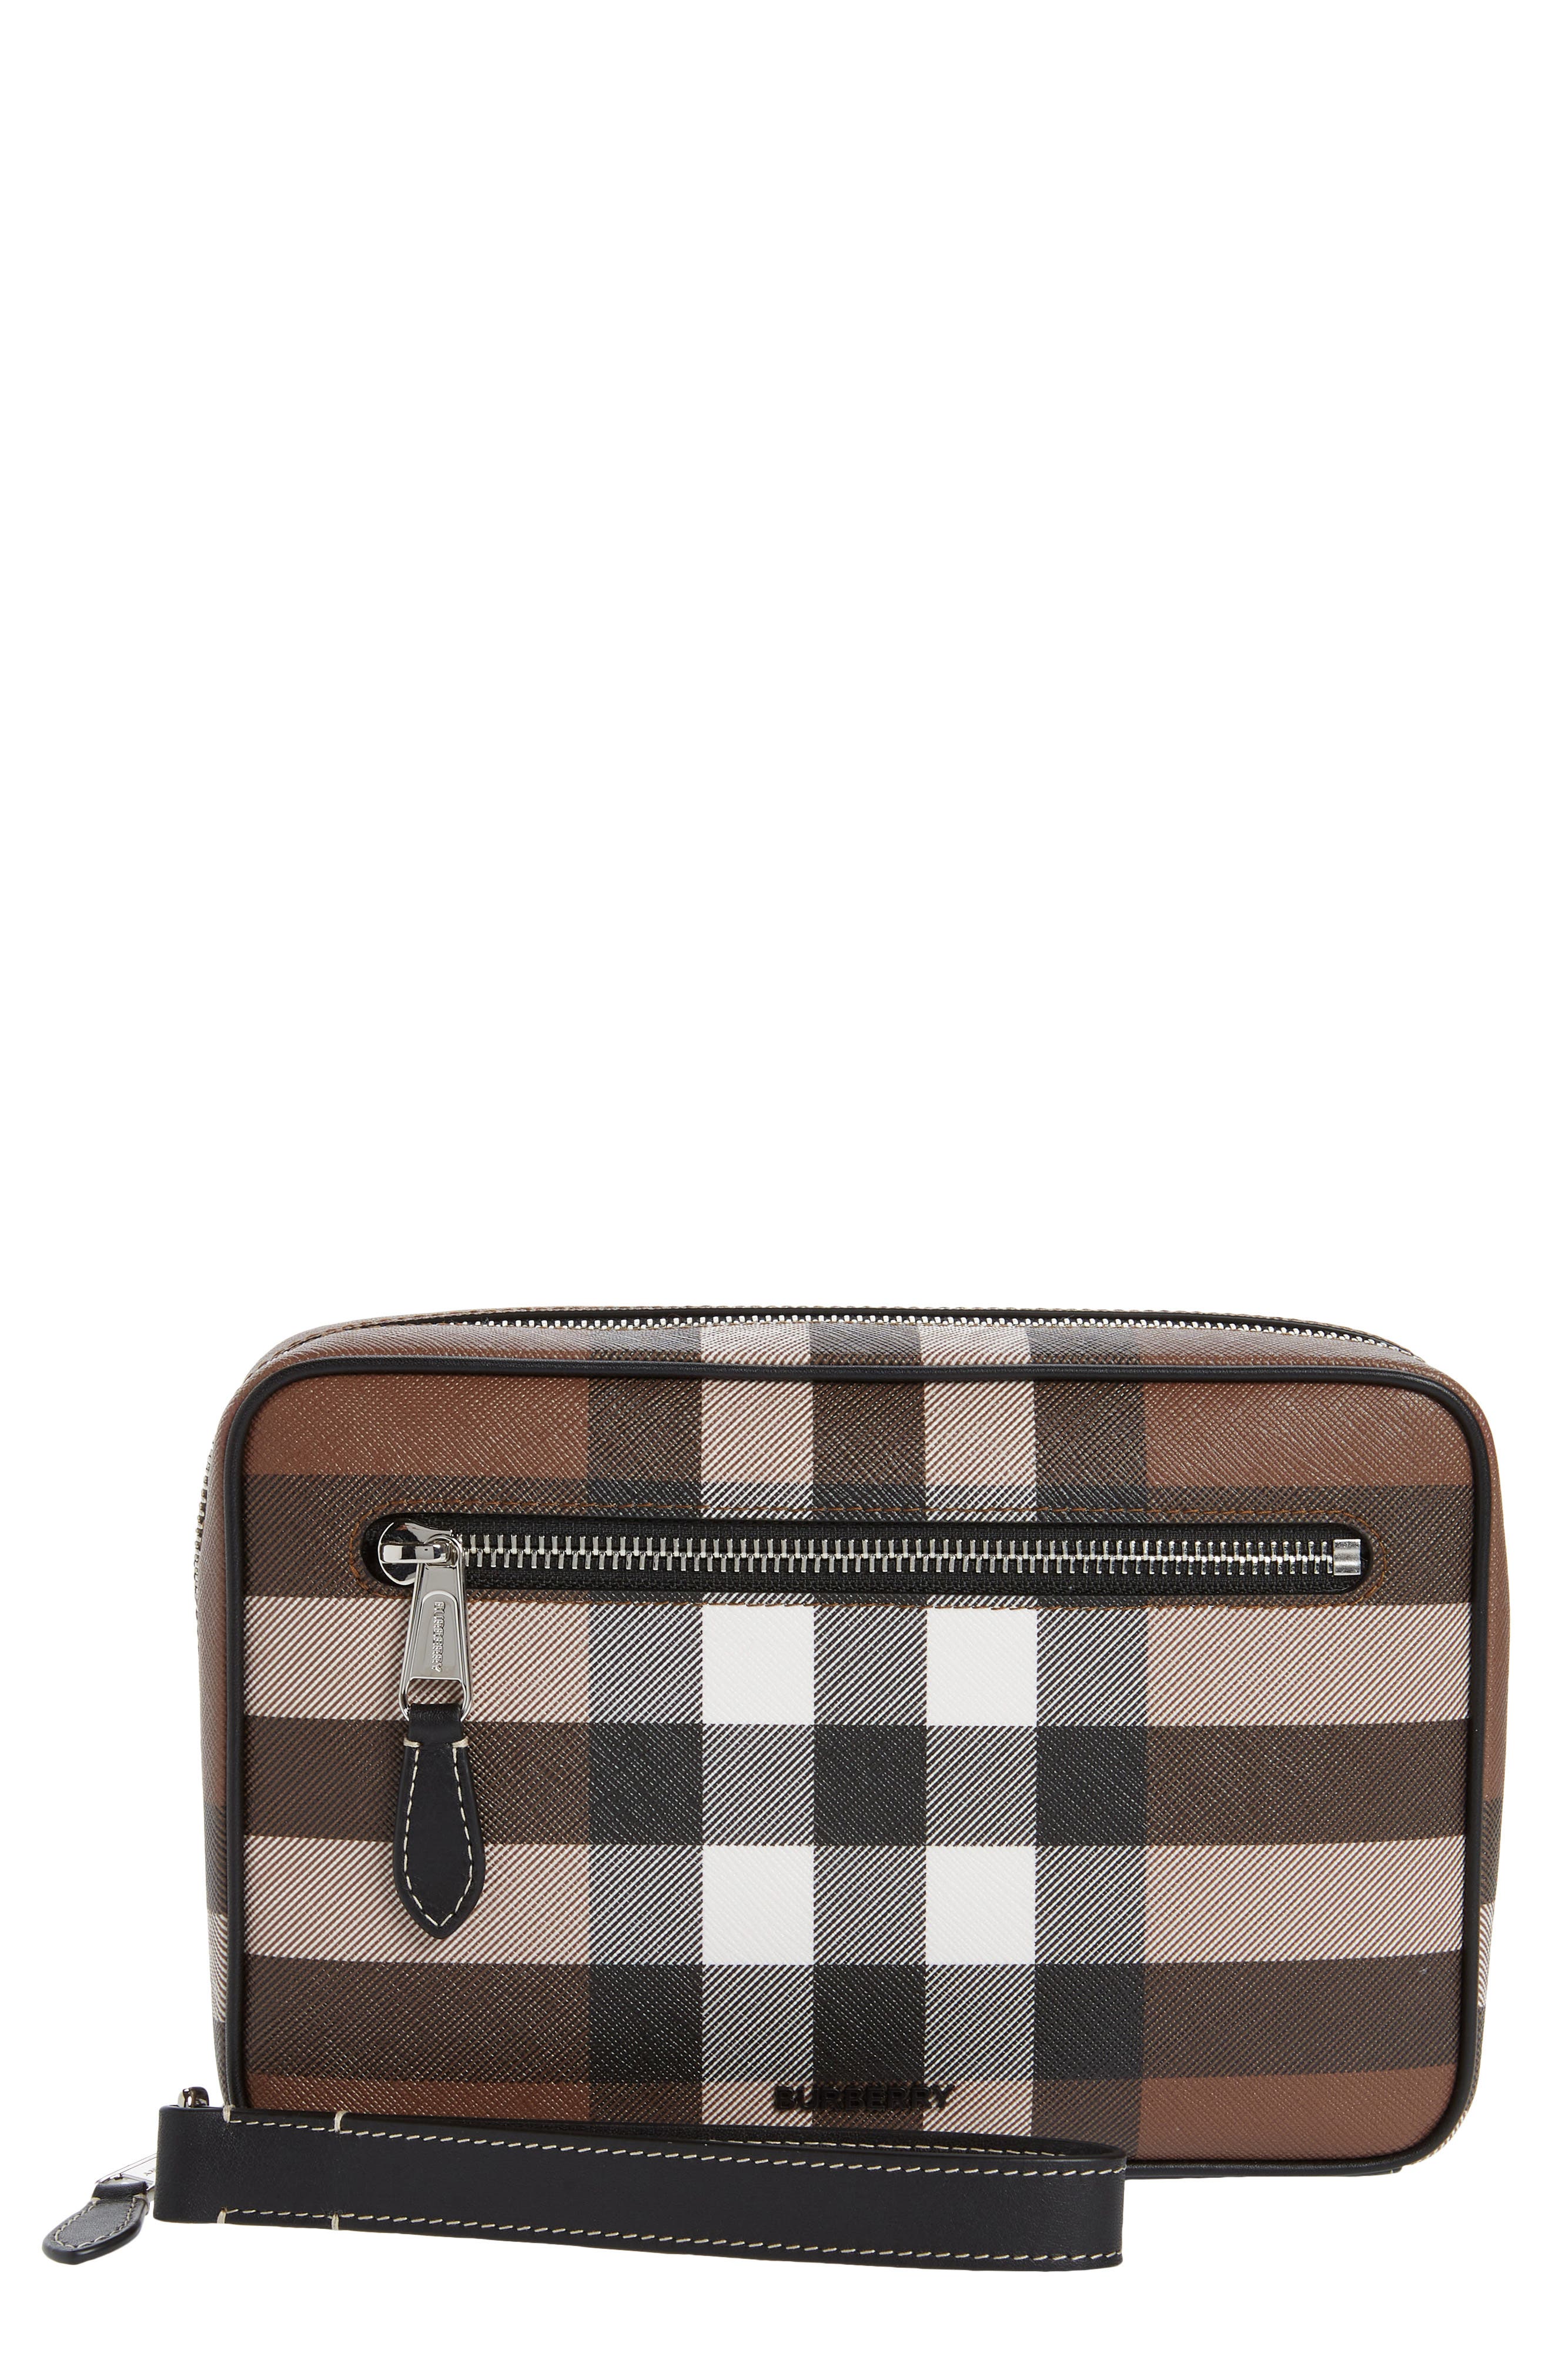 Burberry Finster Check Pouch in Dark Birch Brown at Nordstrom